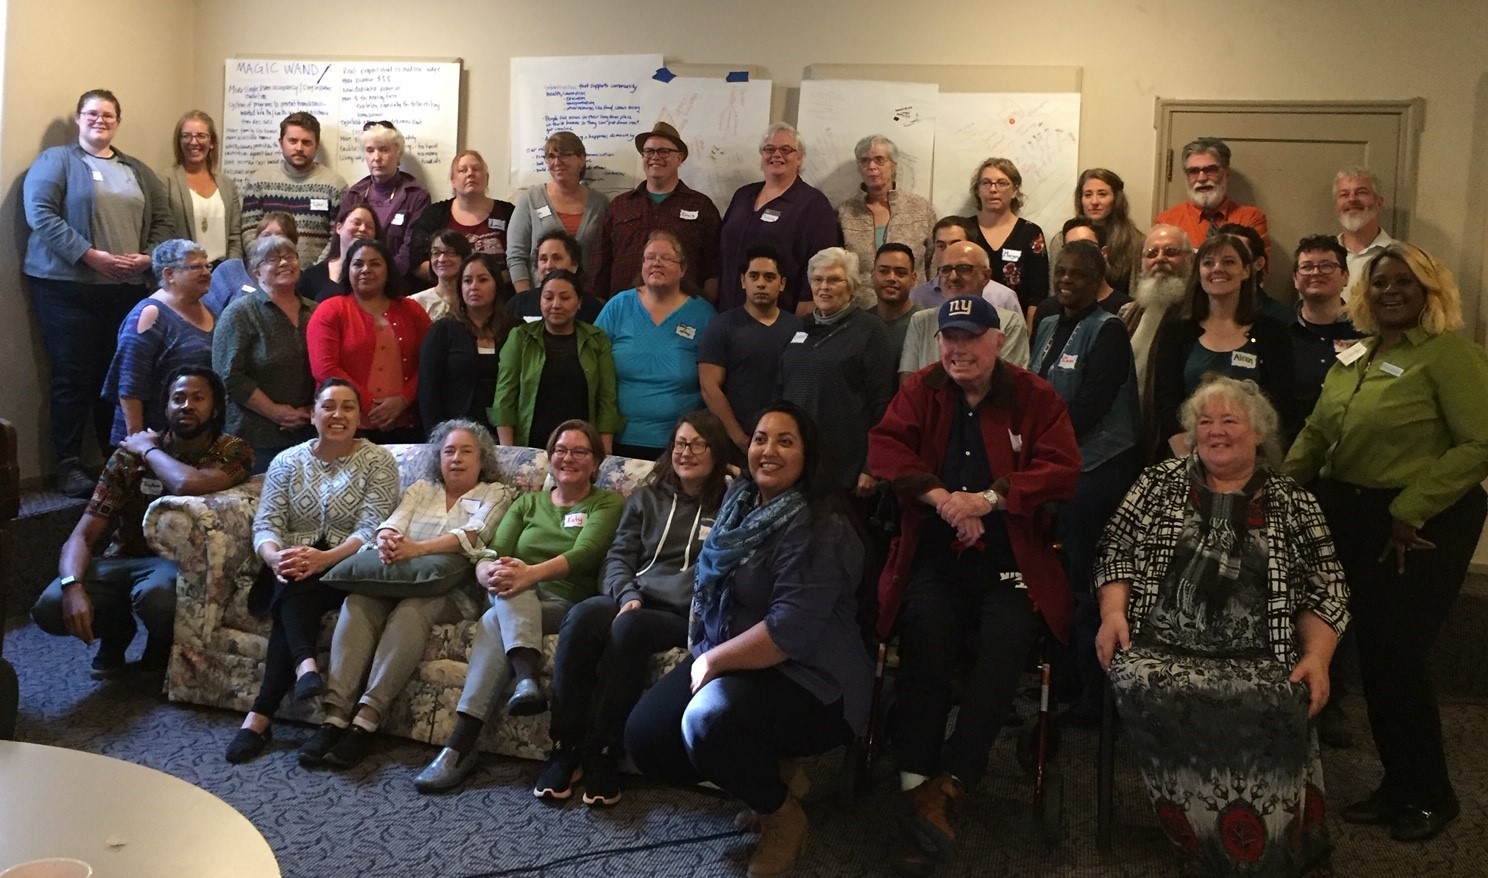 Oregon Launches Statewide Resident Organizing Network